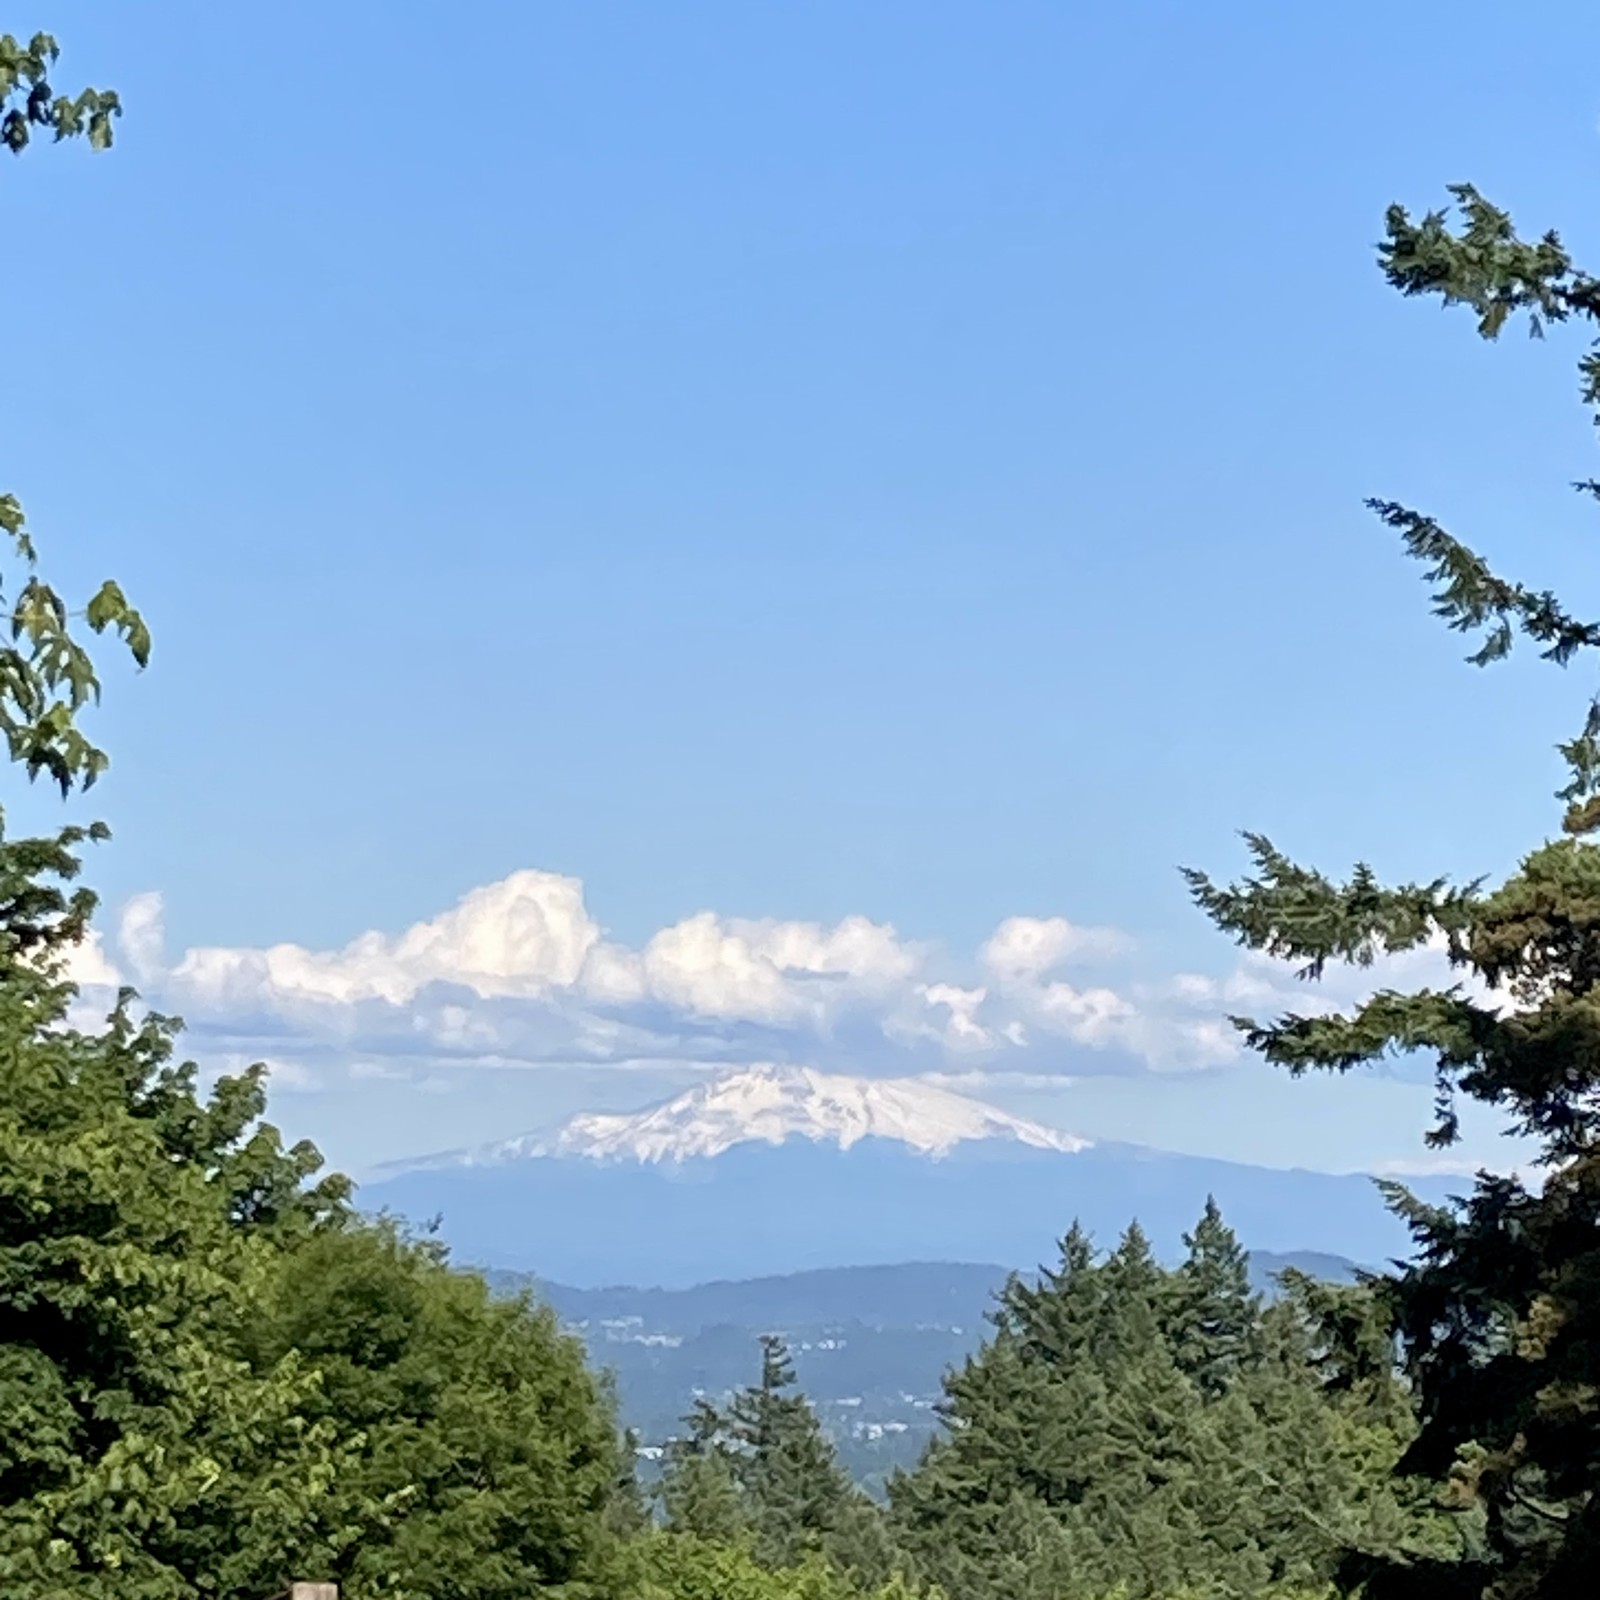 Mt. Hood, as photographed from Council Crest Park. Under a clear sky the mountain shines with snow. A few fluffy clouds cling to its peak